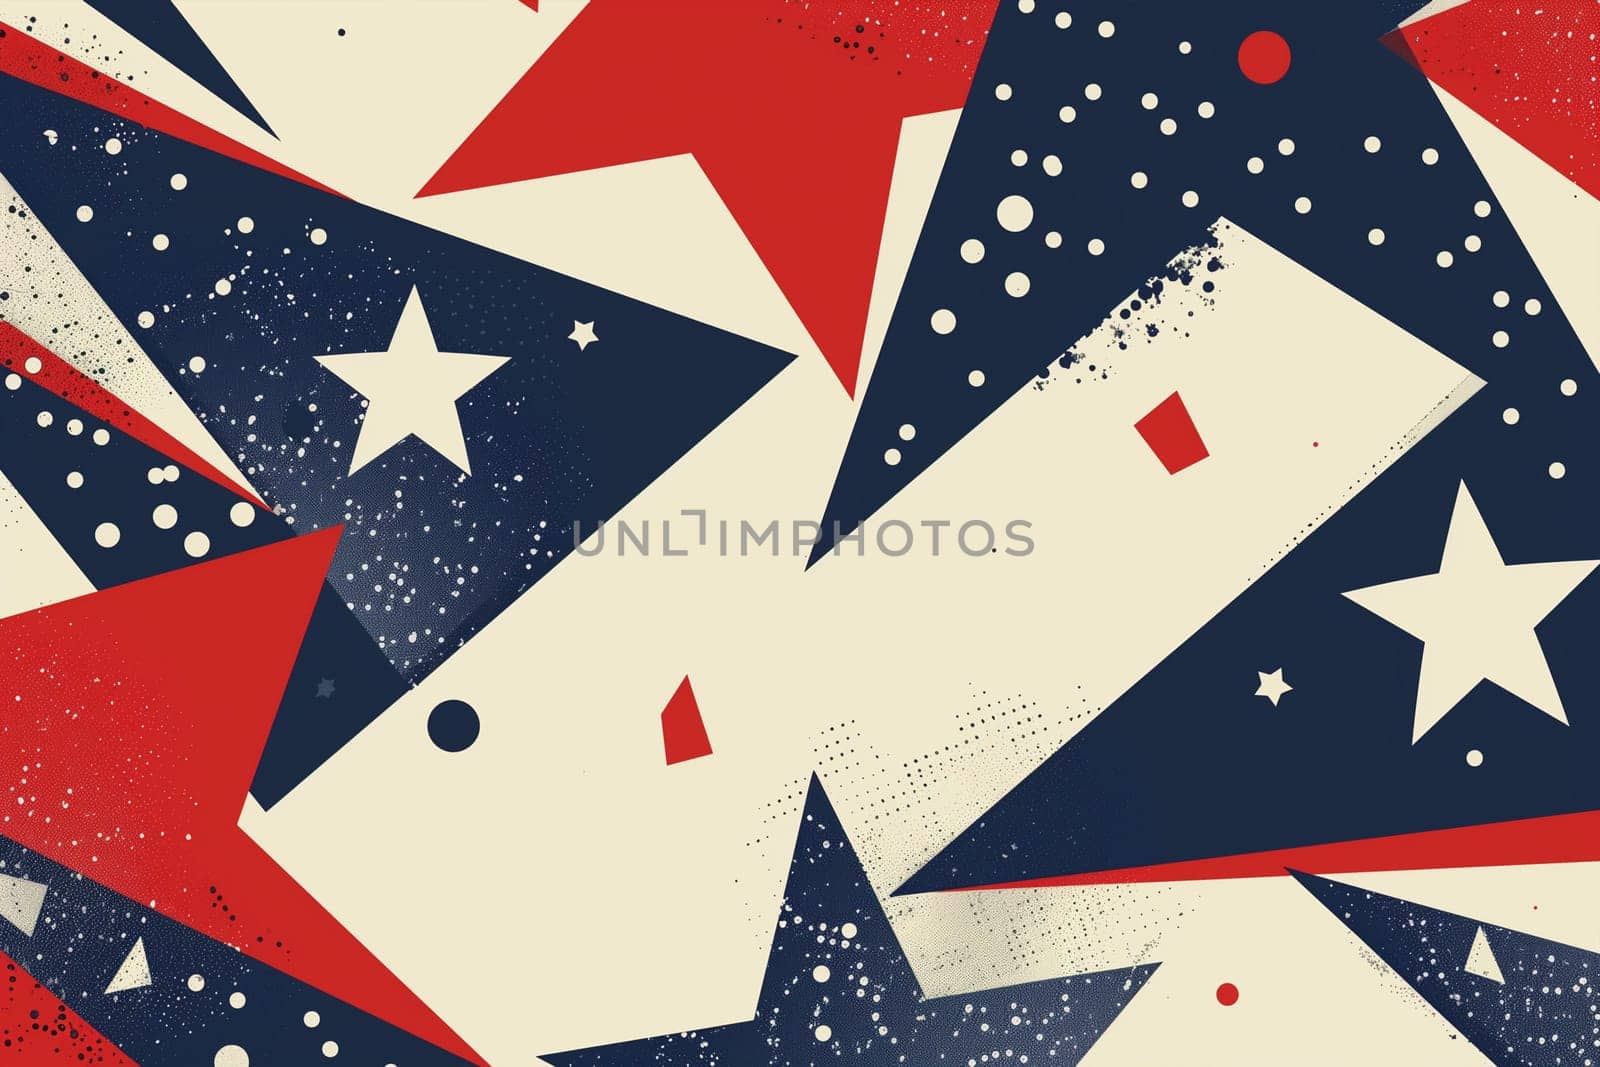 Patriotic Red, White, and Blue Background With Stars by Sd28DimoN_1976